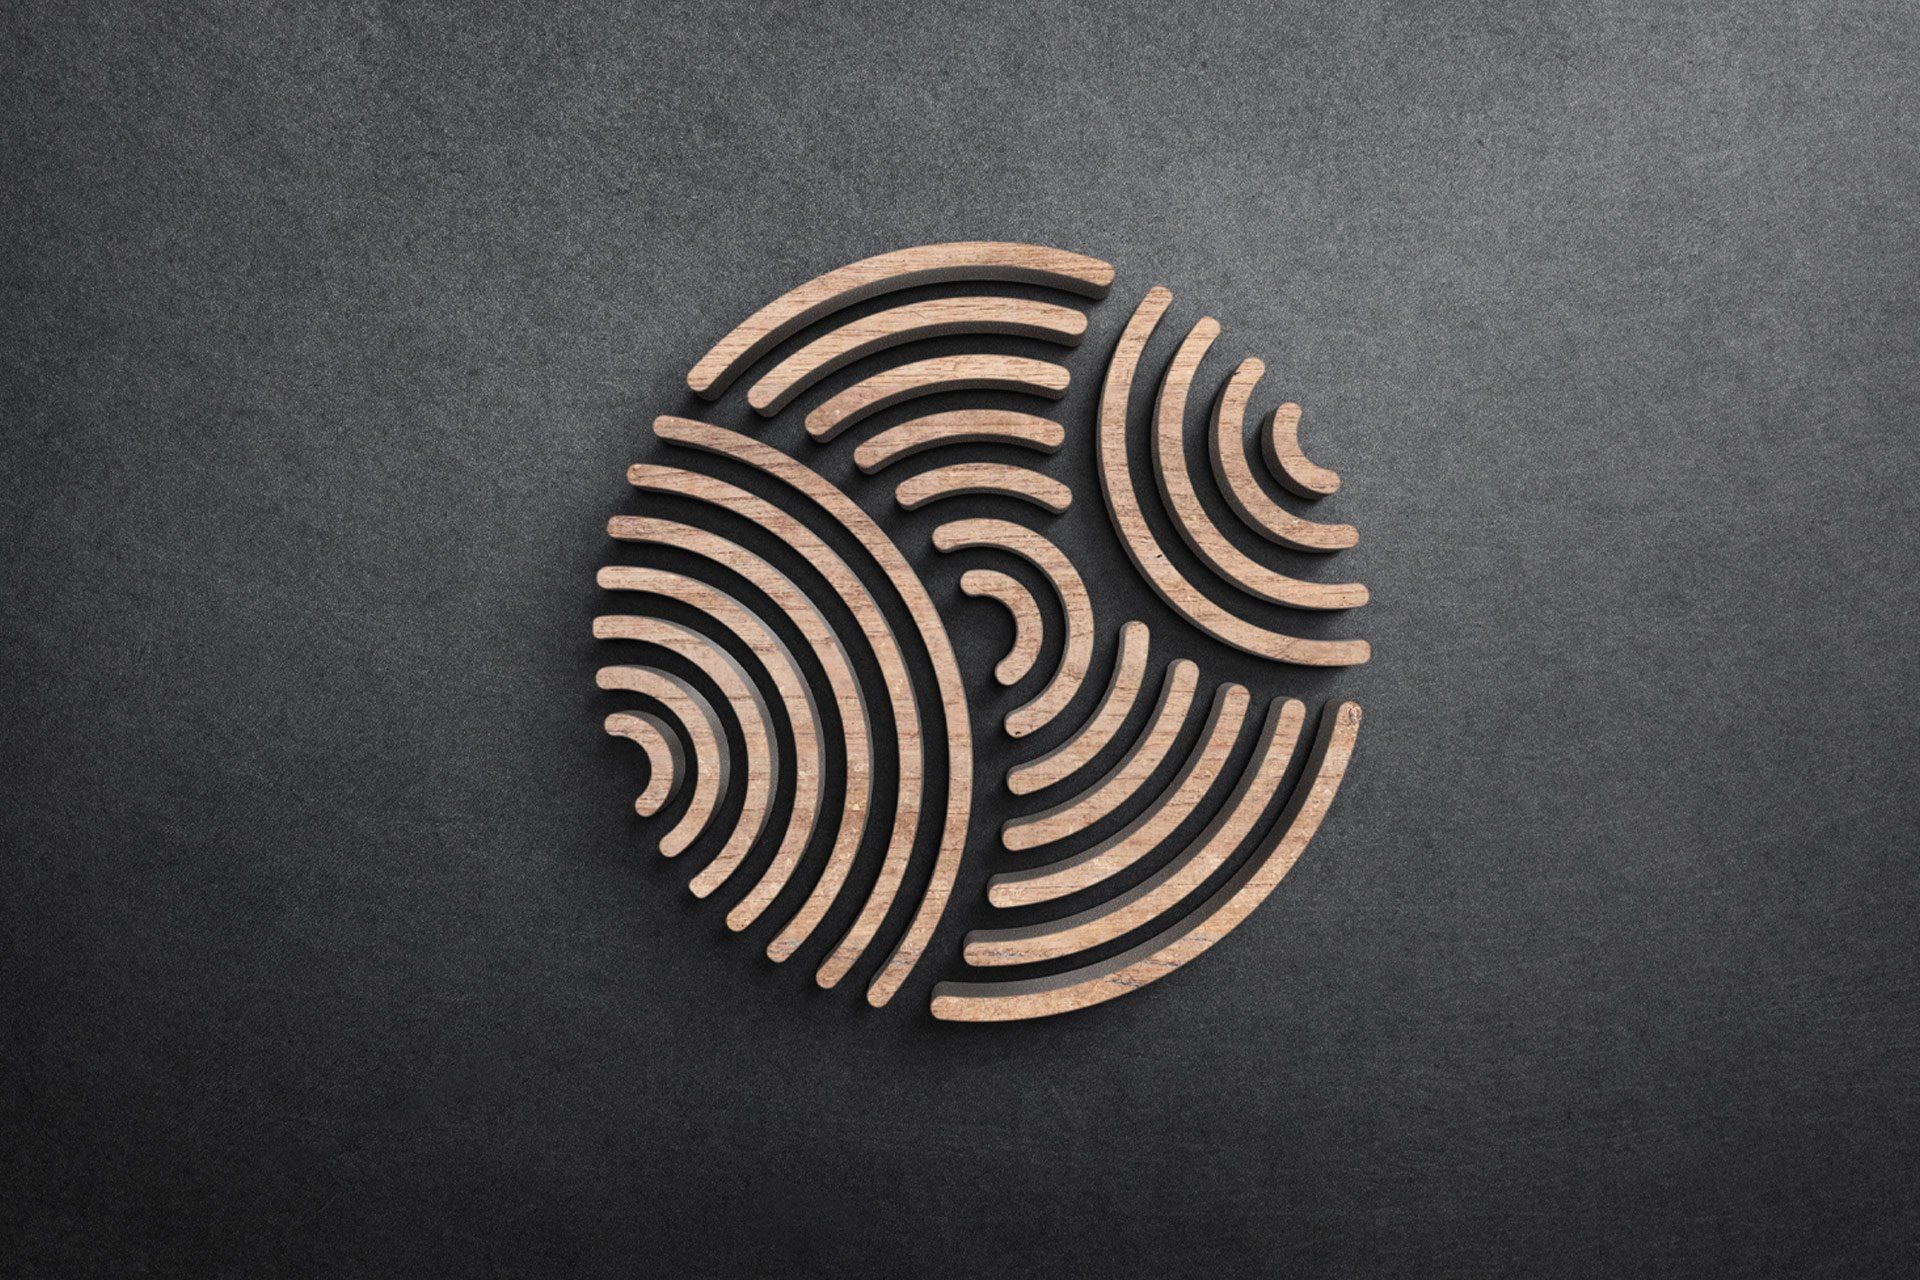 Cero logo (icon only) made out of wood and set on a dark background